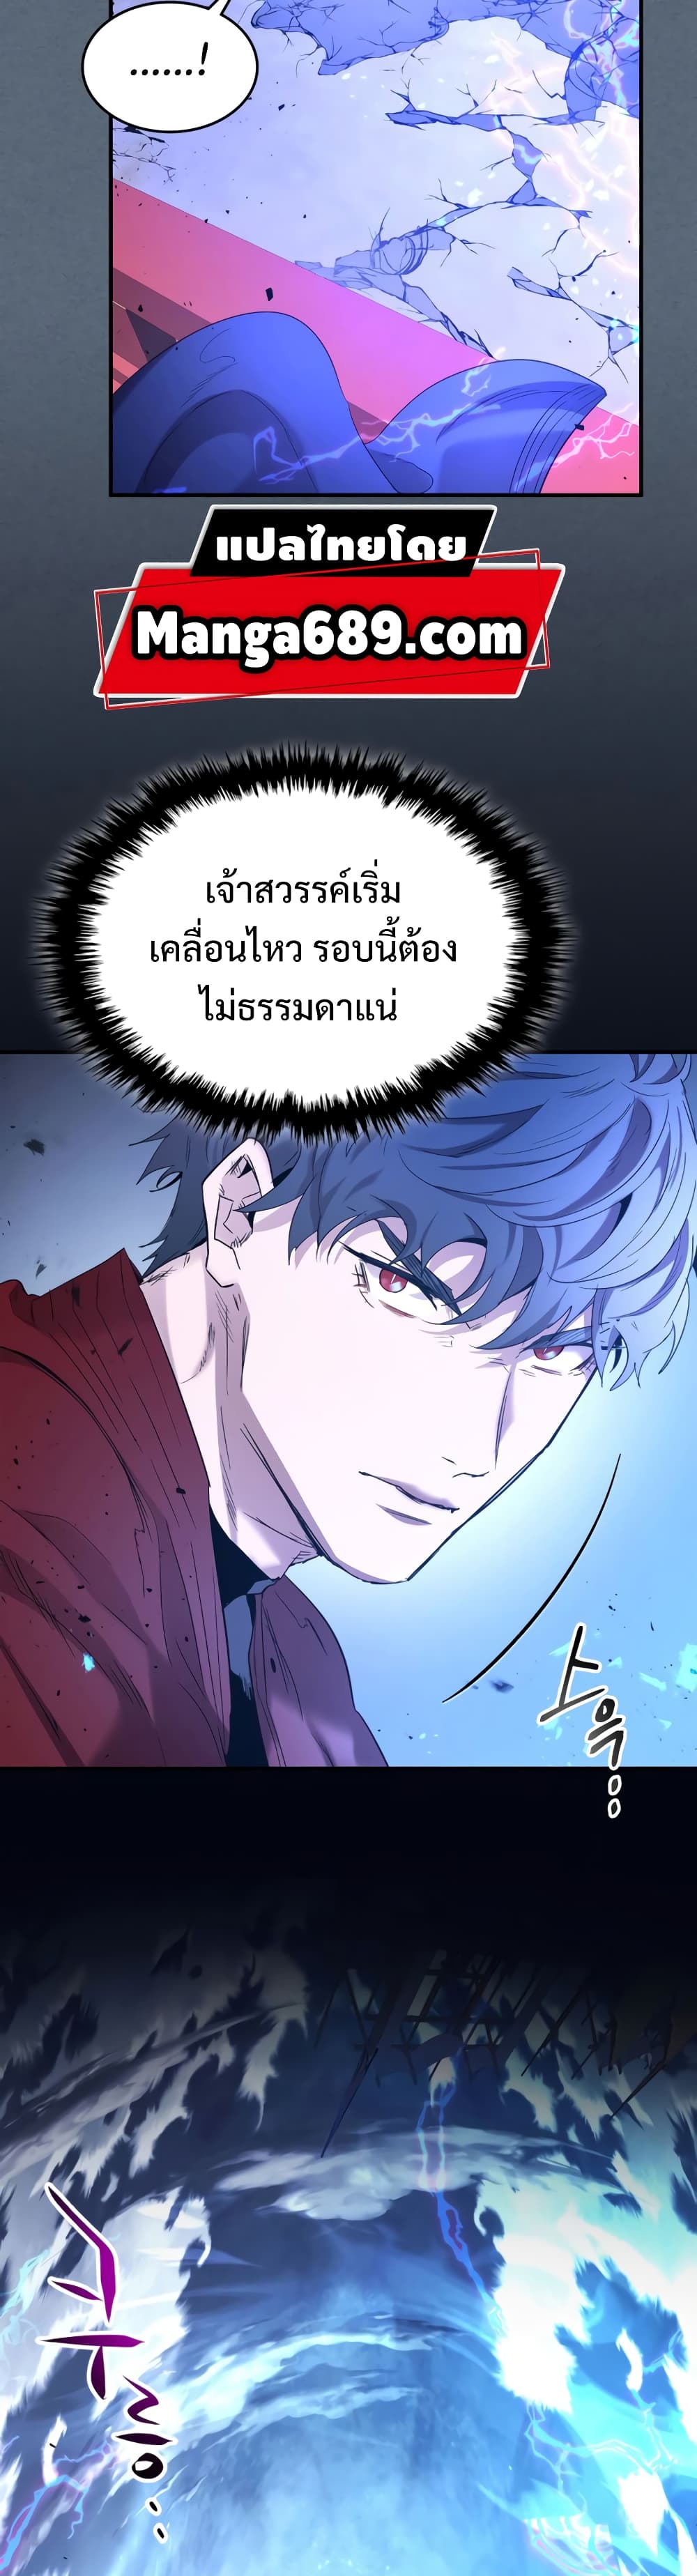 Leveling With The Gods 40 แปลไทย